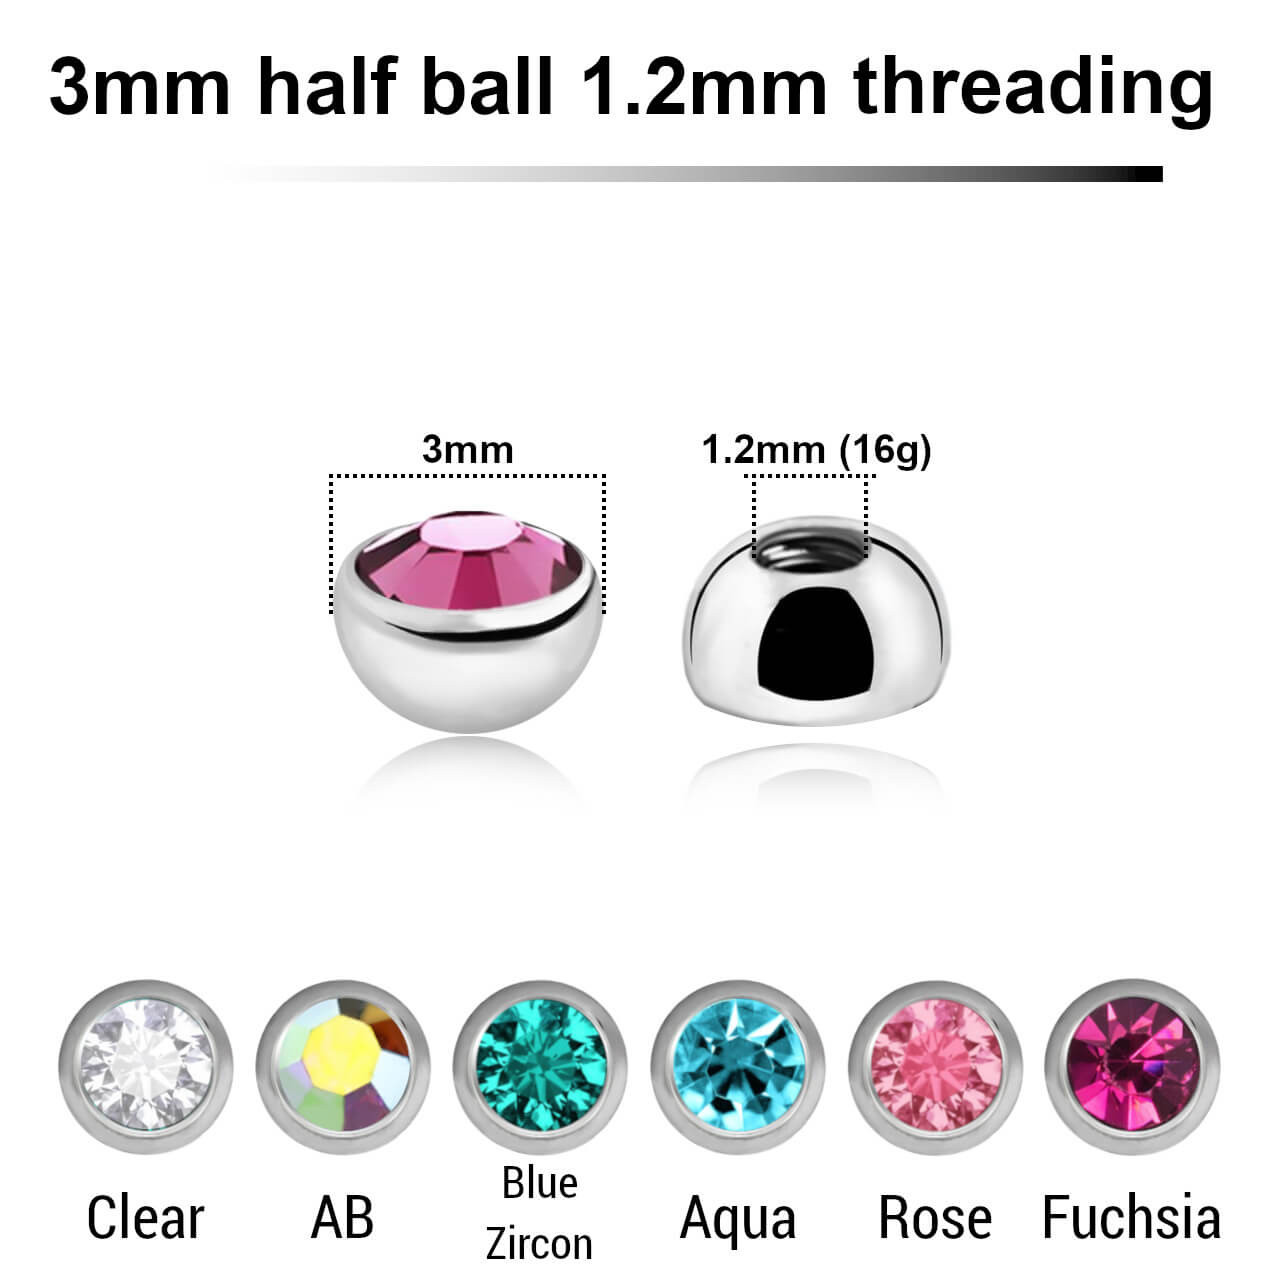 SYB12J3H Piercing studio supplies: Pack of 25 high polished 316L steel half balls with a 3mm diameter and a bezel set crystal, 1.2mm threading